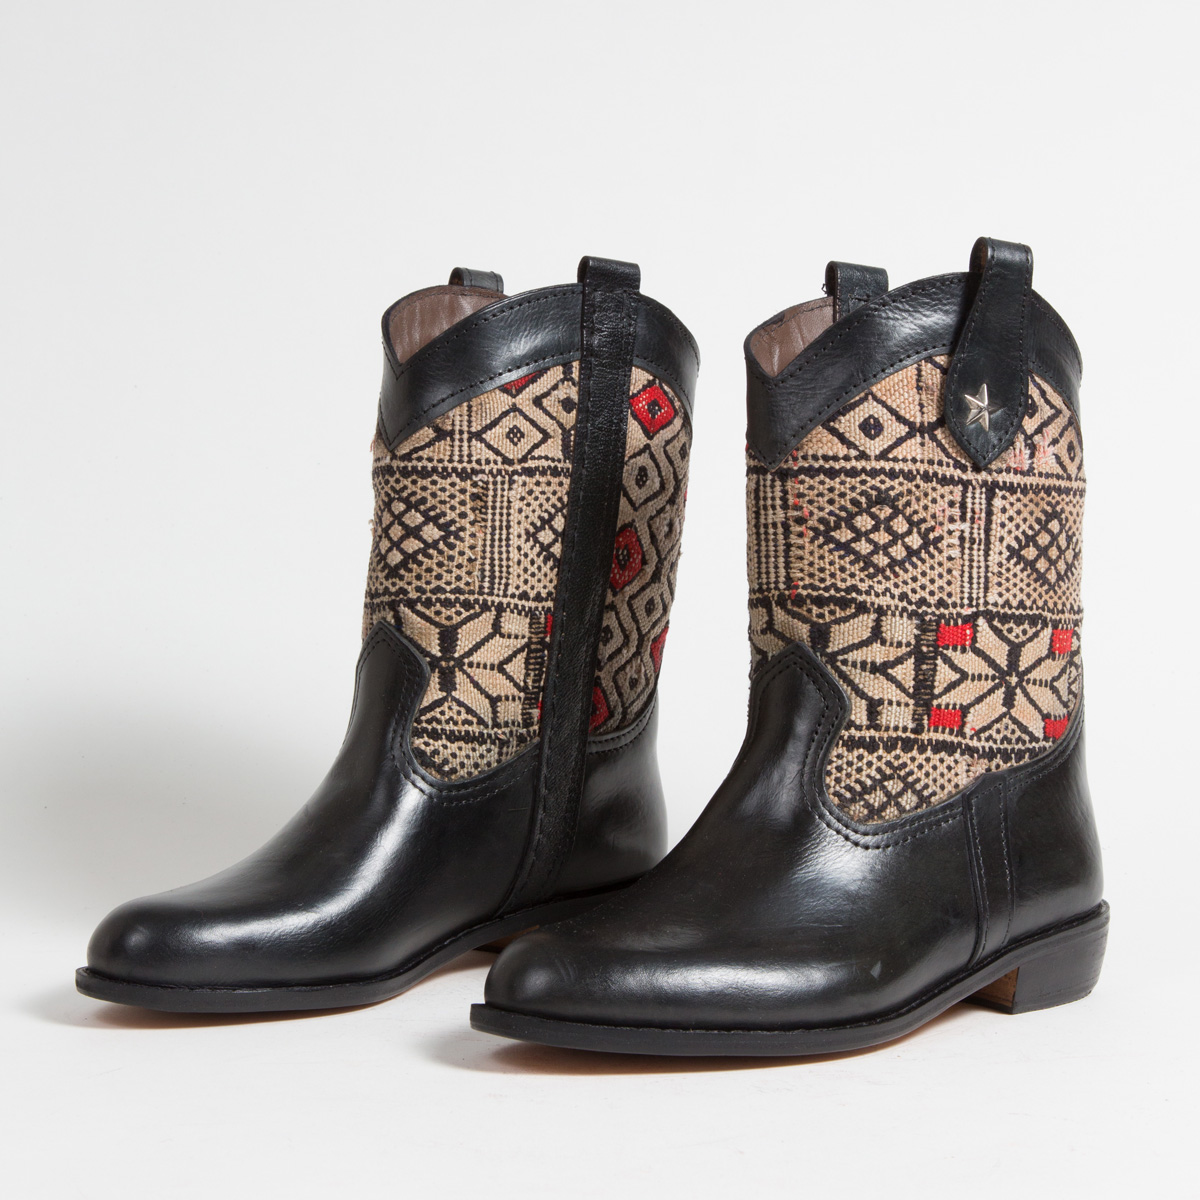 Bottines Kilim cuir mababouche artisanales (Réf. MN7-39)